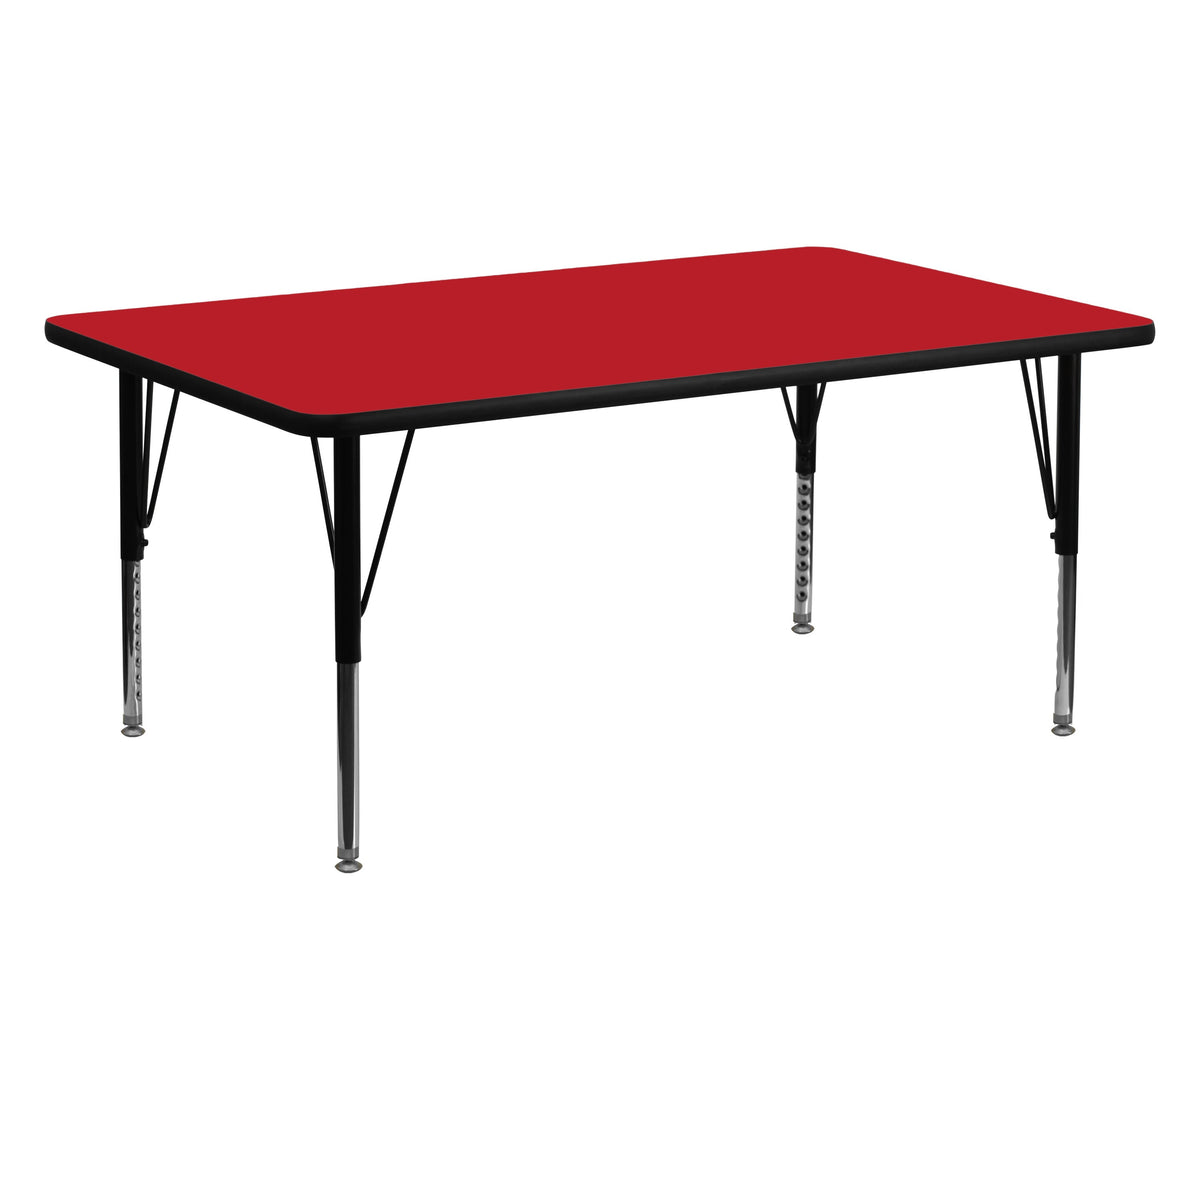 Red |#| 24inchW x 60inchL Rectangular Red HP Laminate Activity Table - Height Adjustable Legs